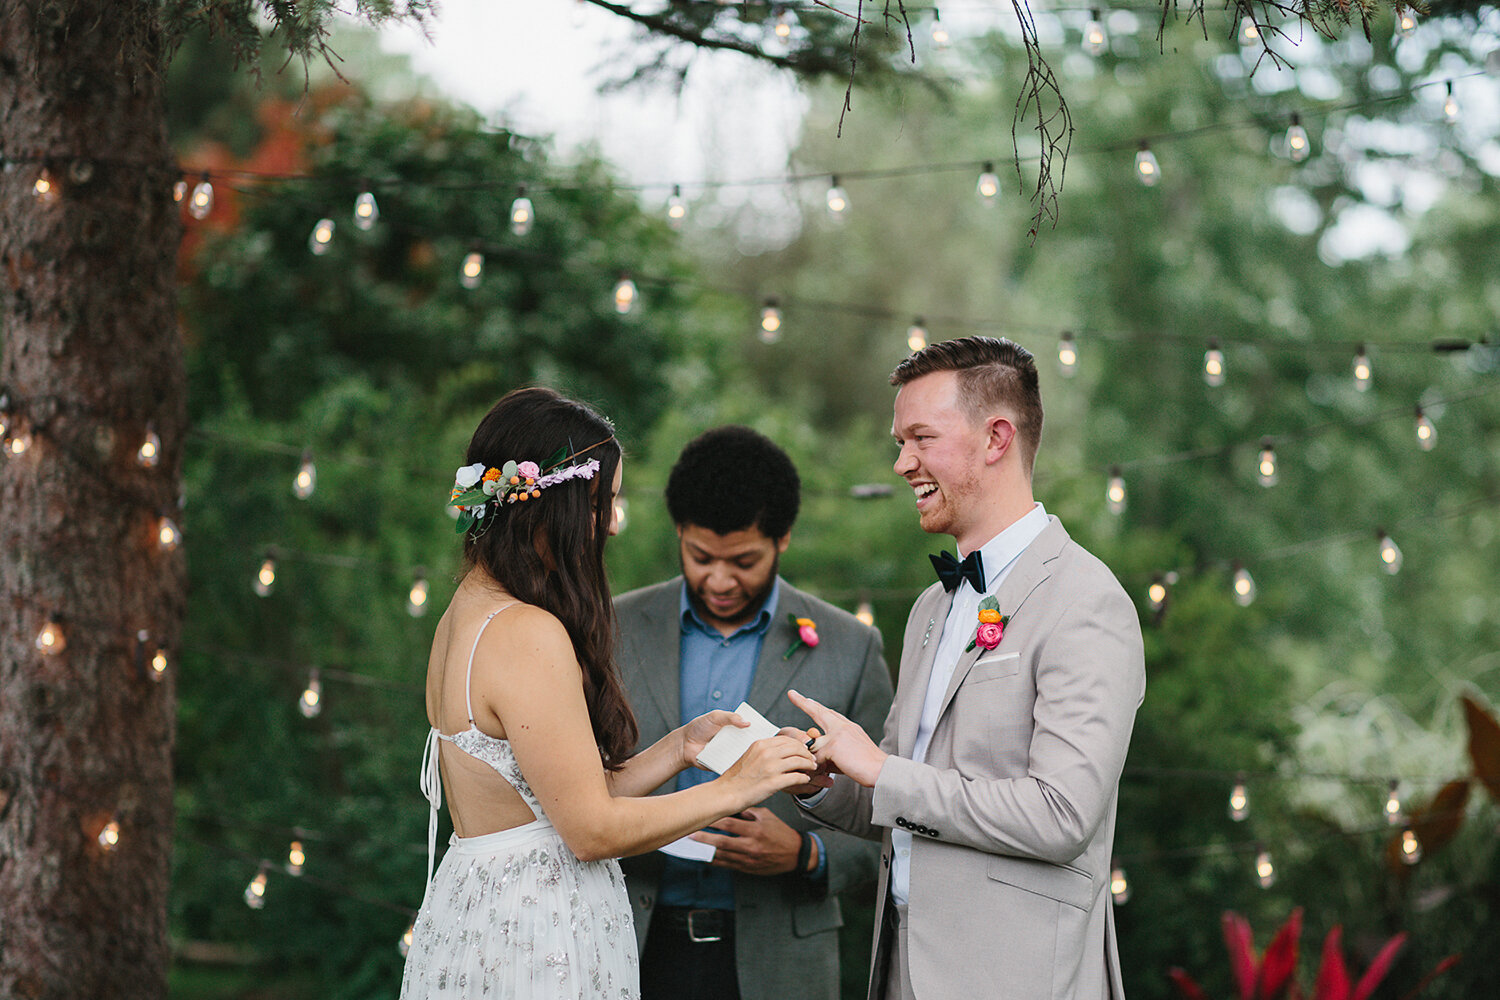 Backyard-family-intimate-cottage-wedding-chatum-kent-toronto-ontario-film-photographer-ryanne-hollies-photography-diy-string-lights-ceremony-space-lanterns-groom-and-bride-ring-exchange-emotional-smiles-cool-trendy-hipster-groom-laughing.JPG